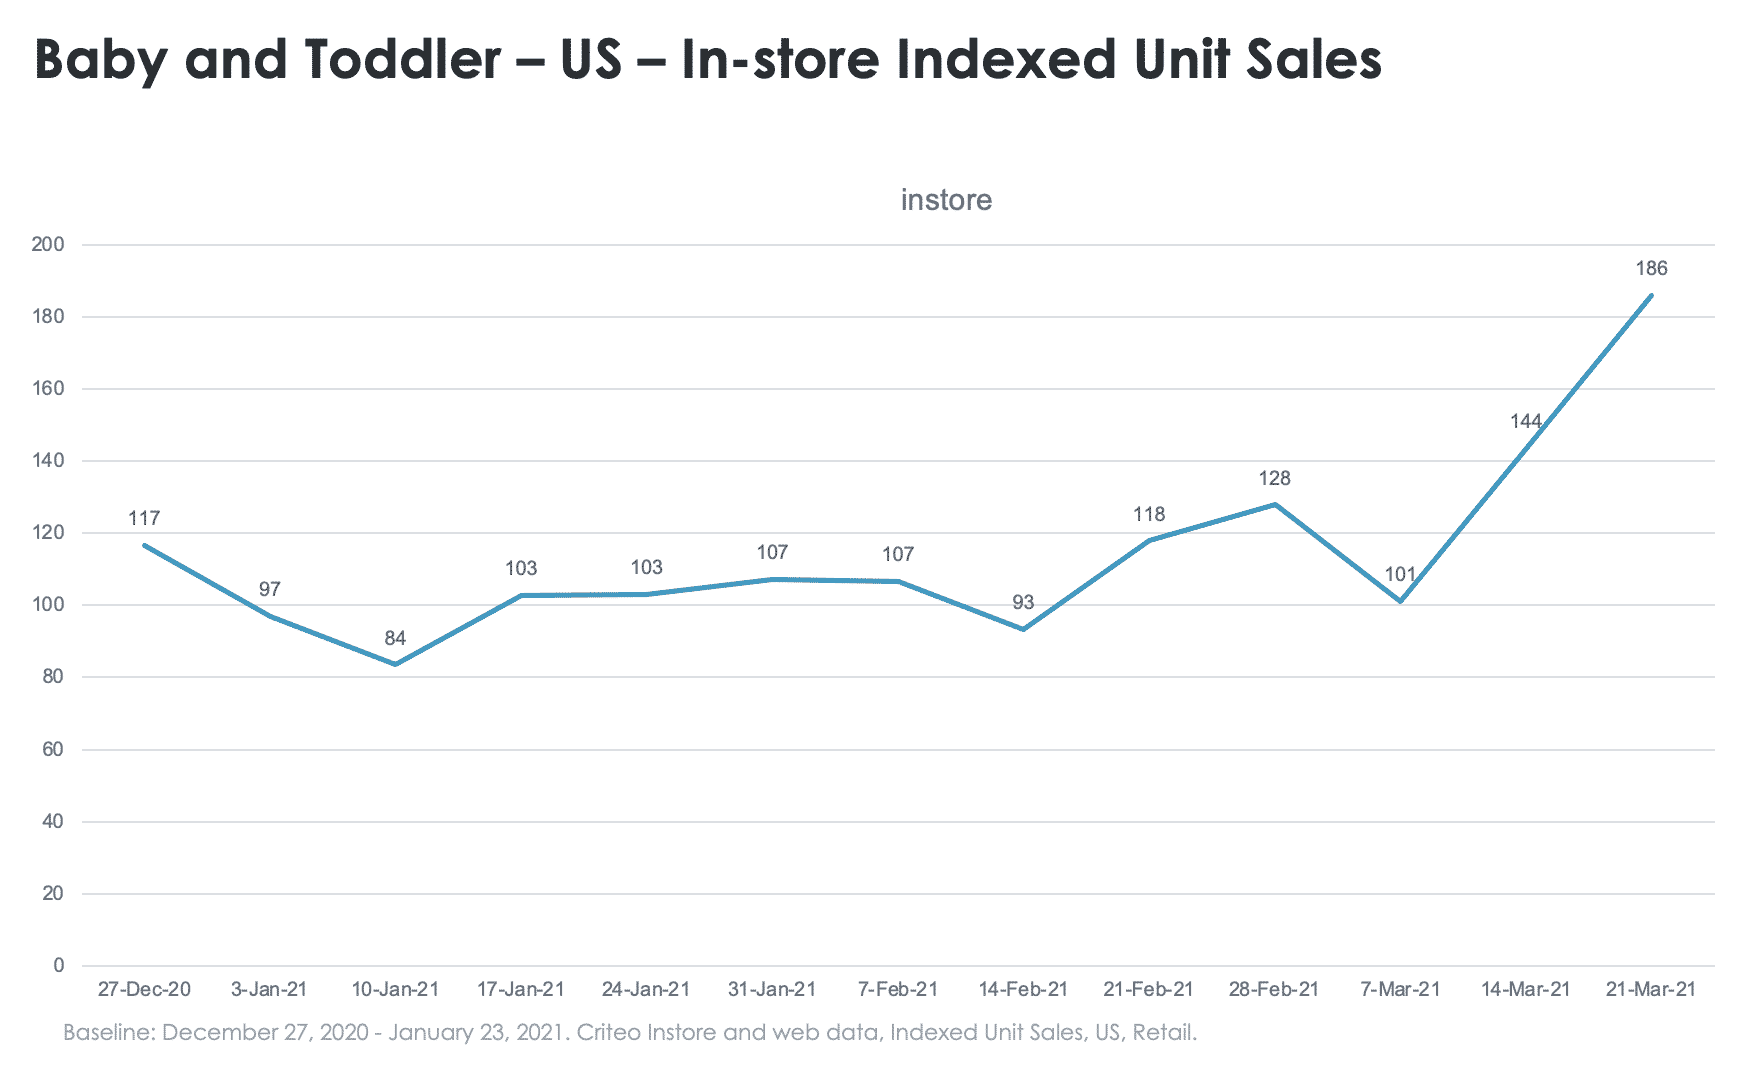 Baby and toddler in-store sales